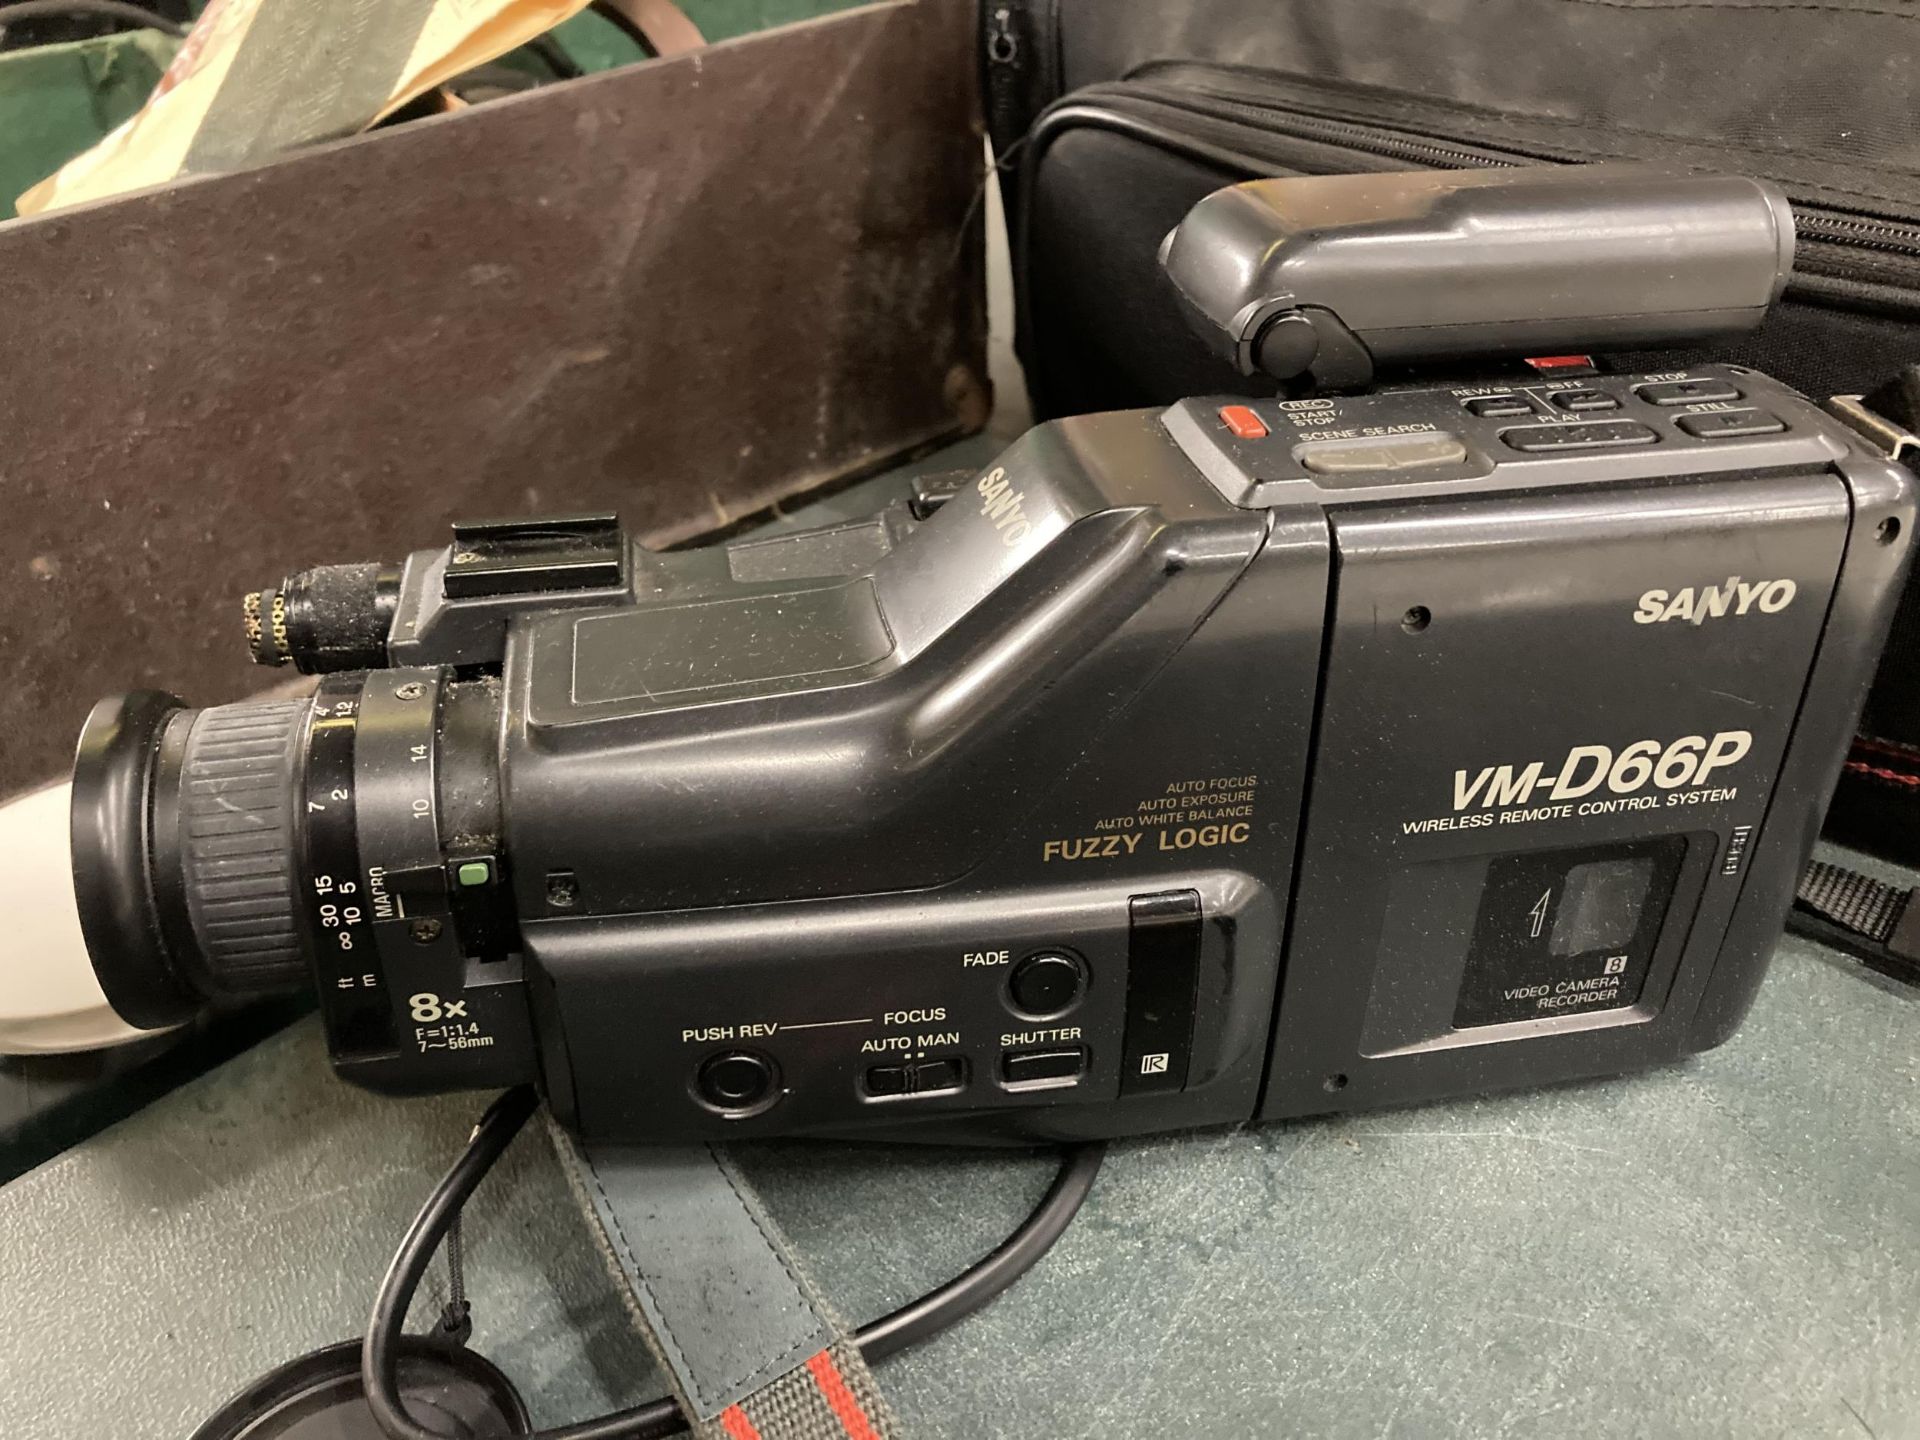 A SANYO VM-D66P VIDEO CAMERA RECORDER WITH CASE - Image 3 of 3